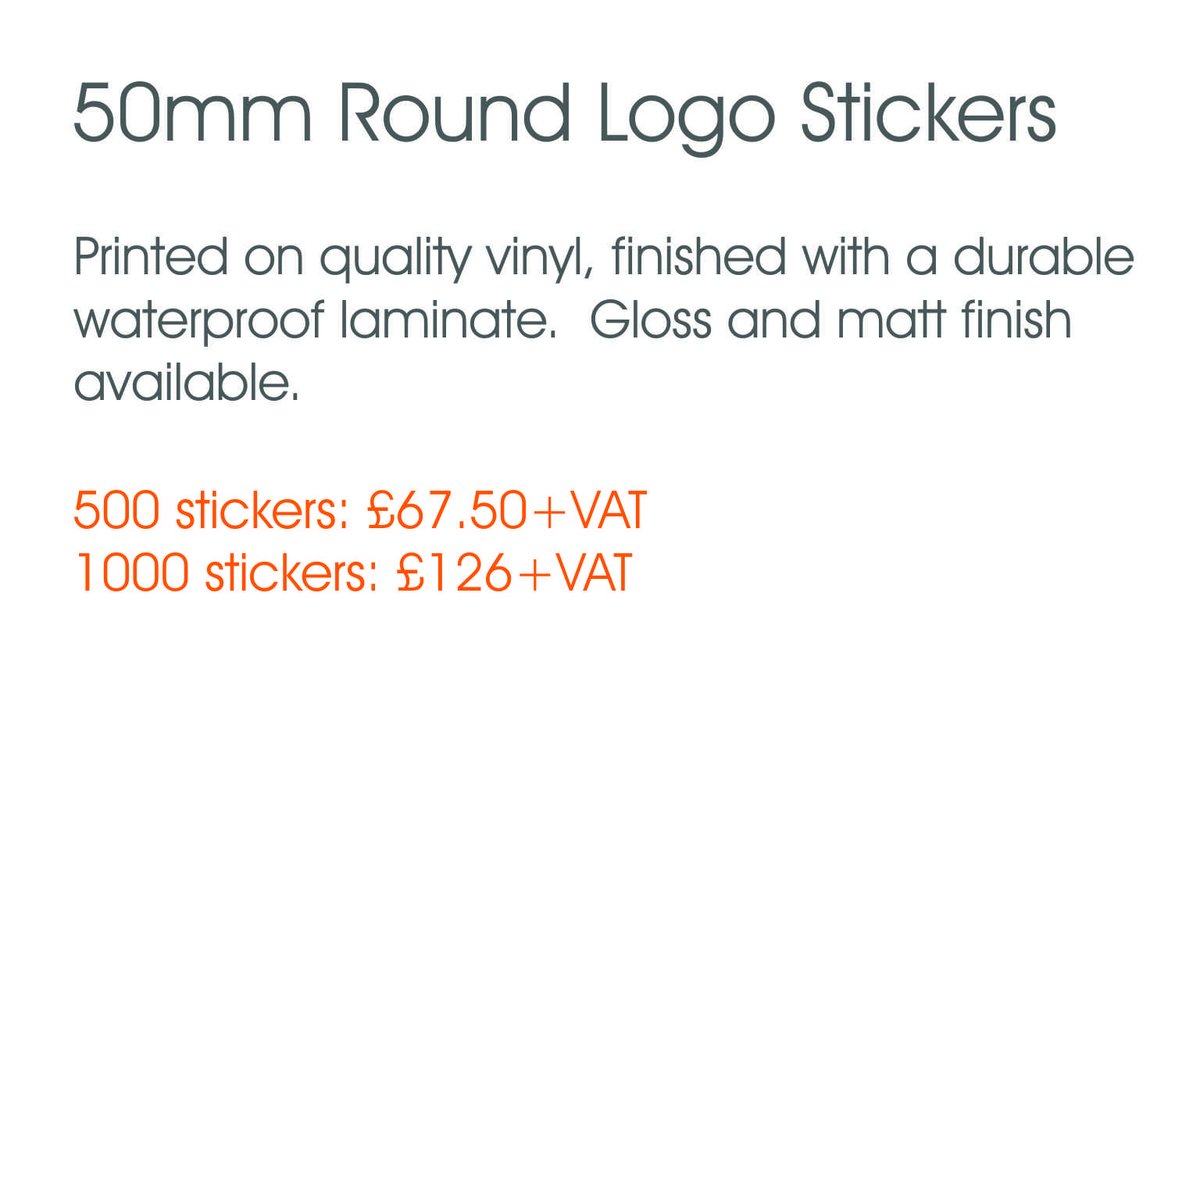 🚨 Promo Alert! 🚨 50mm Round Logo Stickers. Printed on quality vinyl, finished with a durable waterproof and tear-proof laminate - gloss and matt finish available. #RCGraphixLtd #Sale #CustomStickers #BrandedStickers #LogoStickers #BarnsleyBusiness #BarnsleyIsBrill